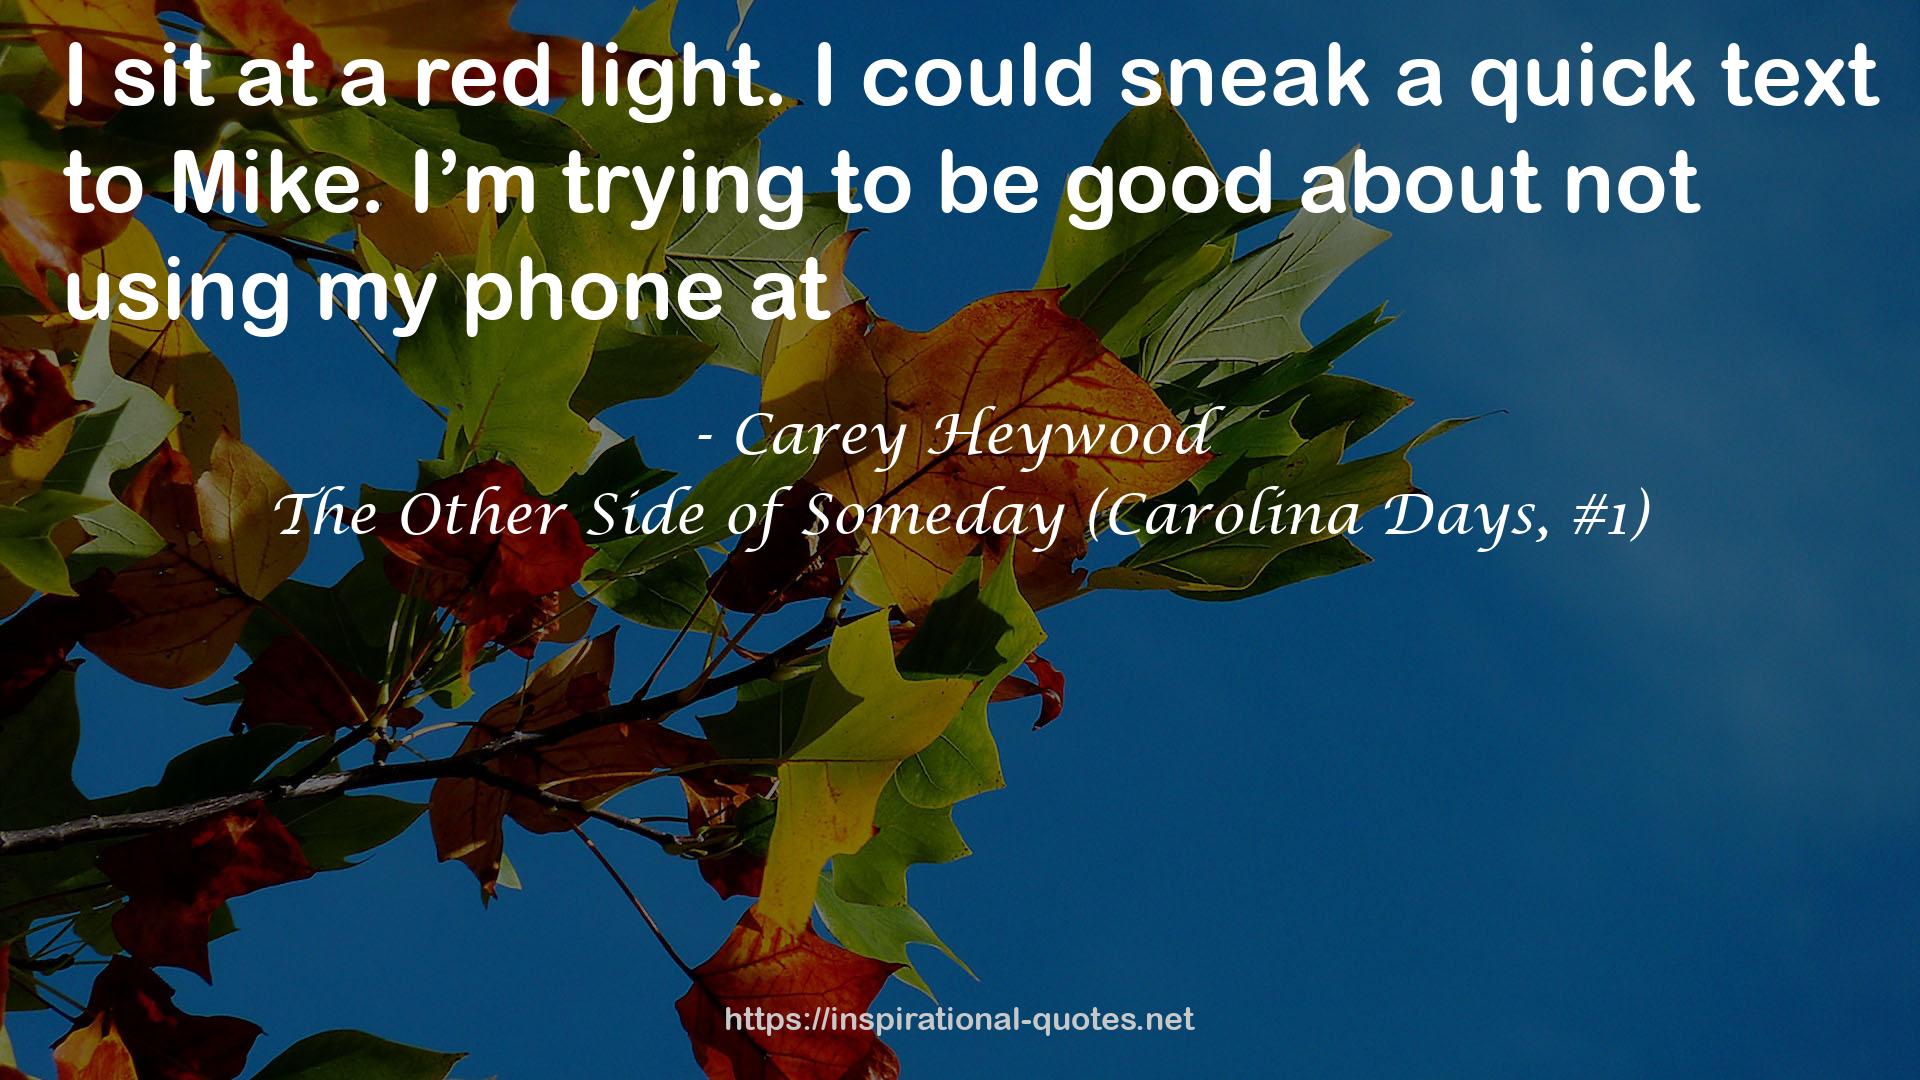 The Other Side of Someday (Carolina Days, #1) QUOTES